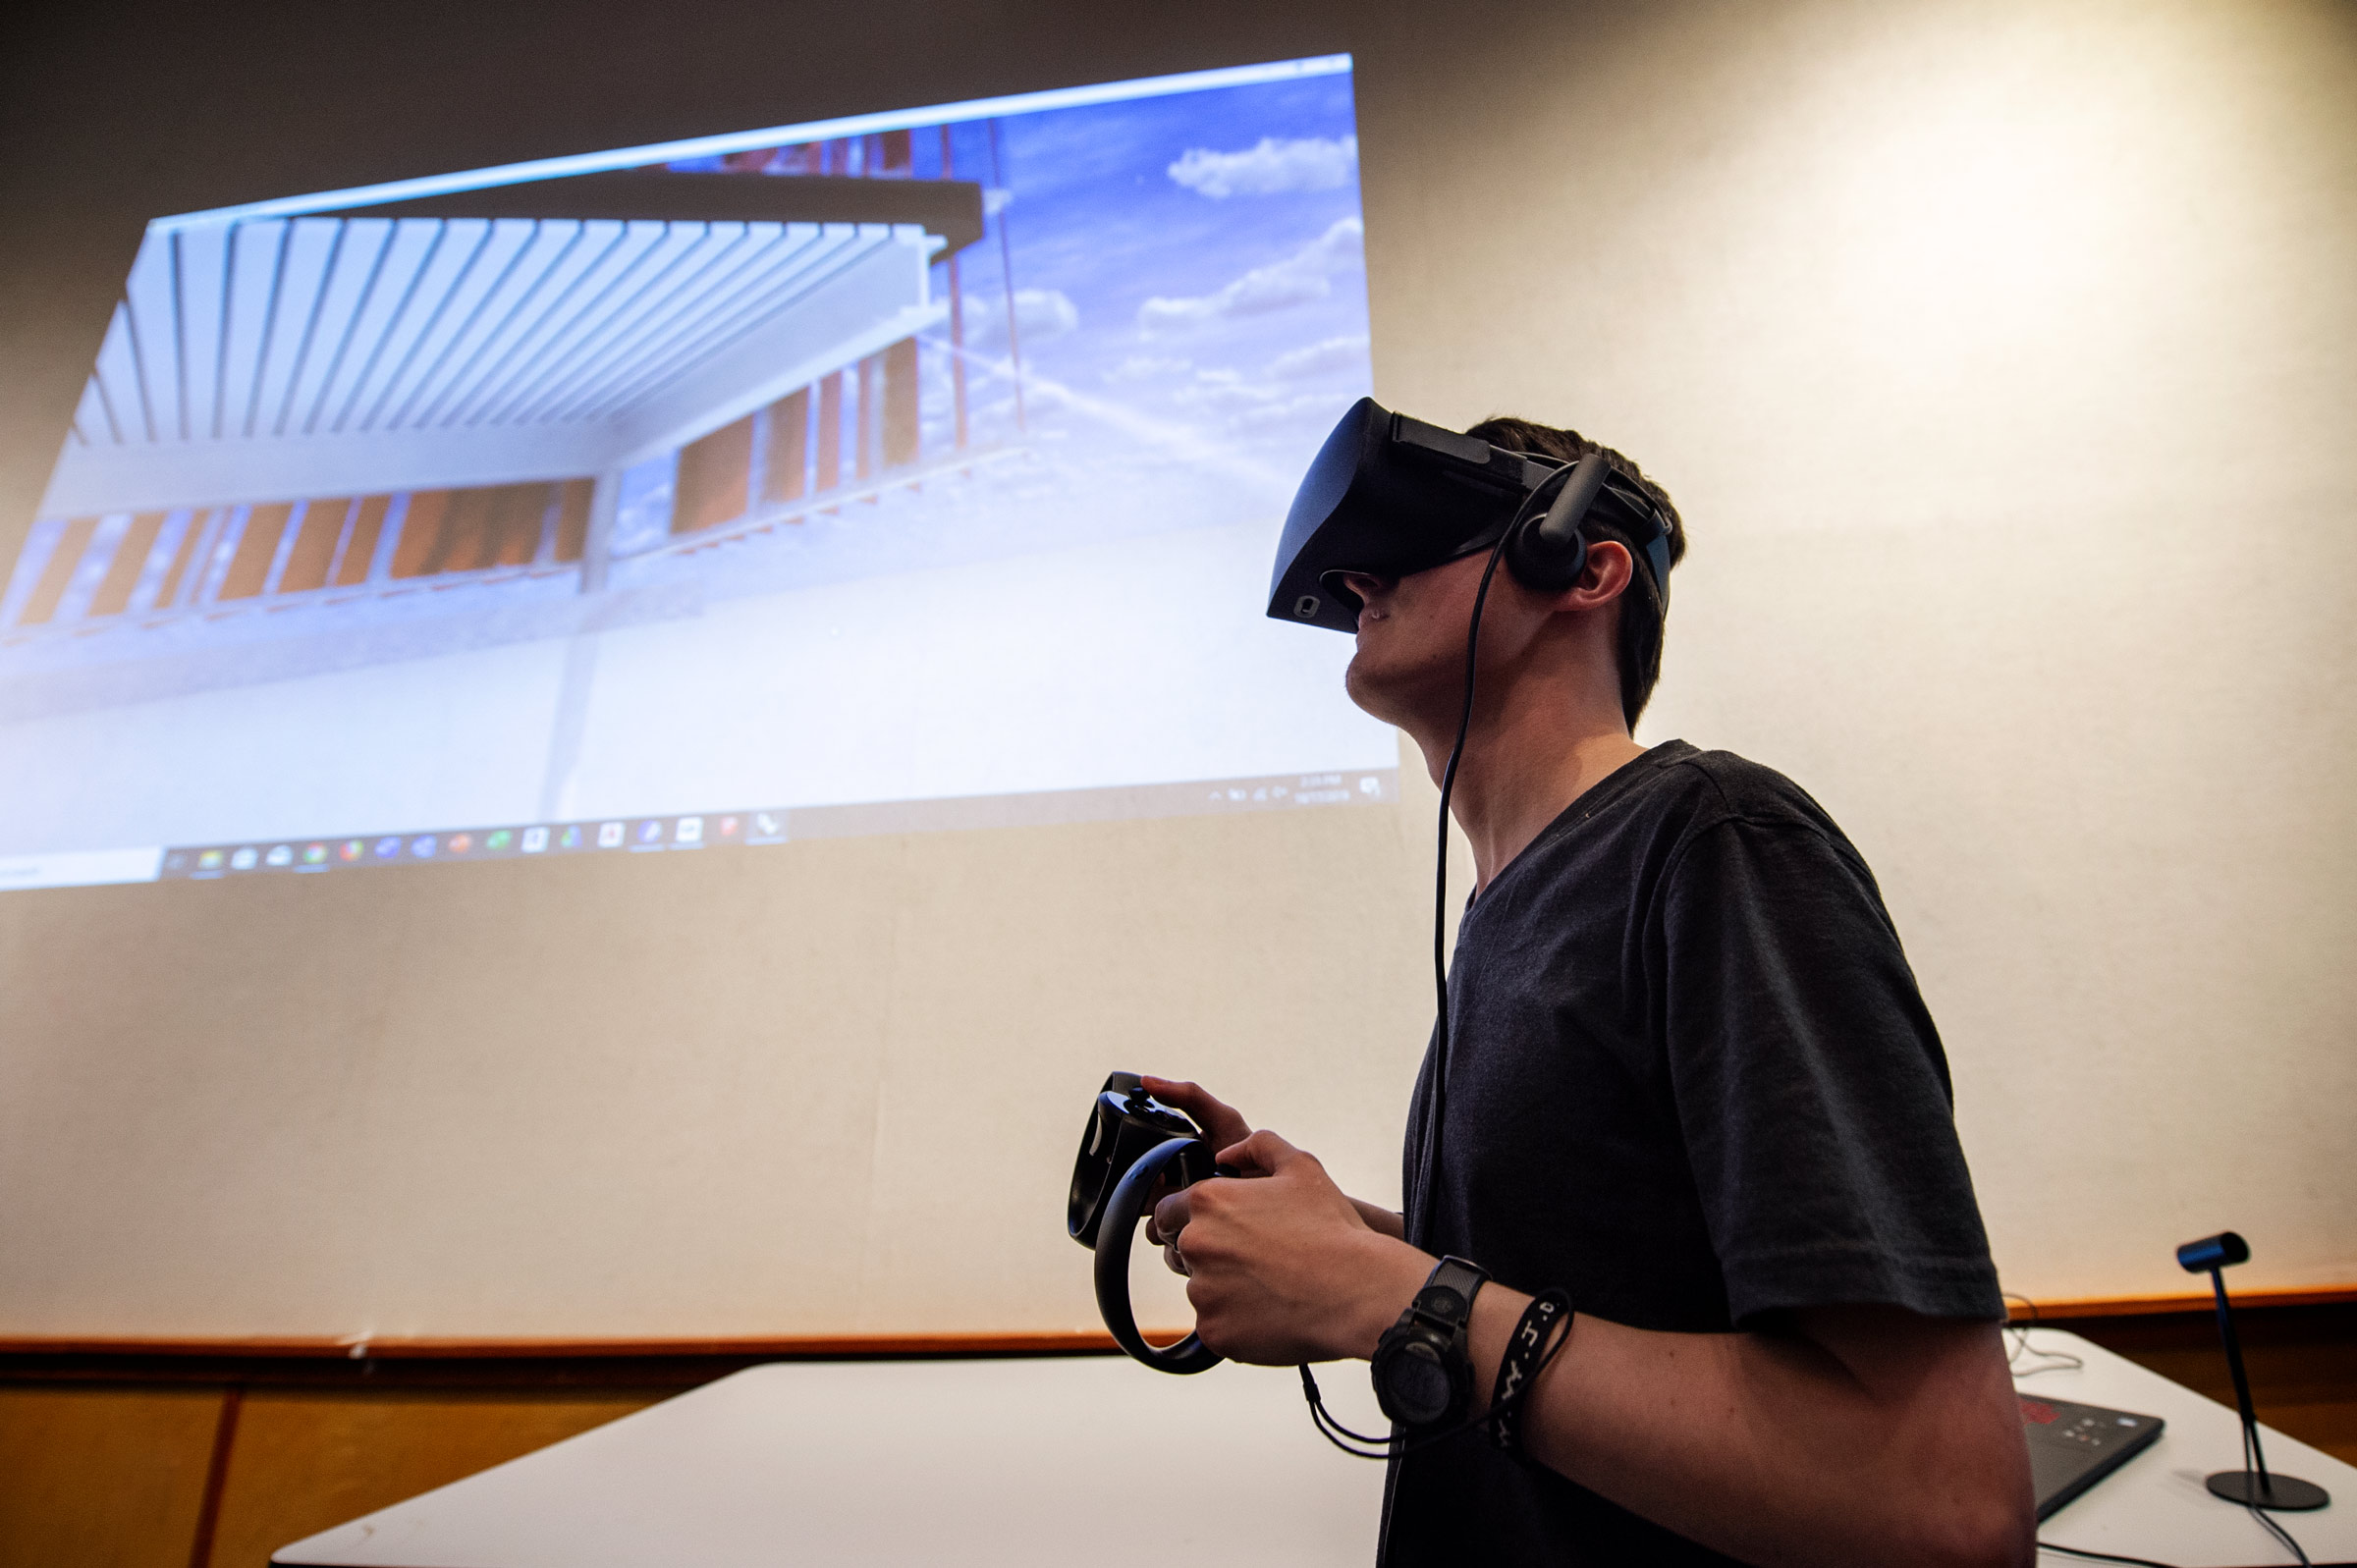 With virtual reality glasses and controls, Architecture student Matthew Churchill tours a 3D rendering of his design with his view projected behind him.